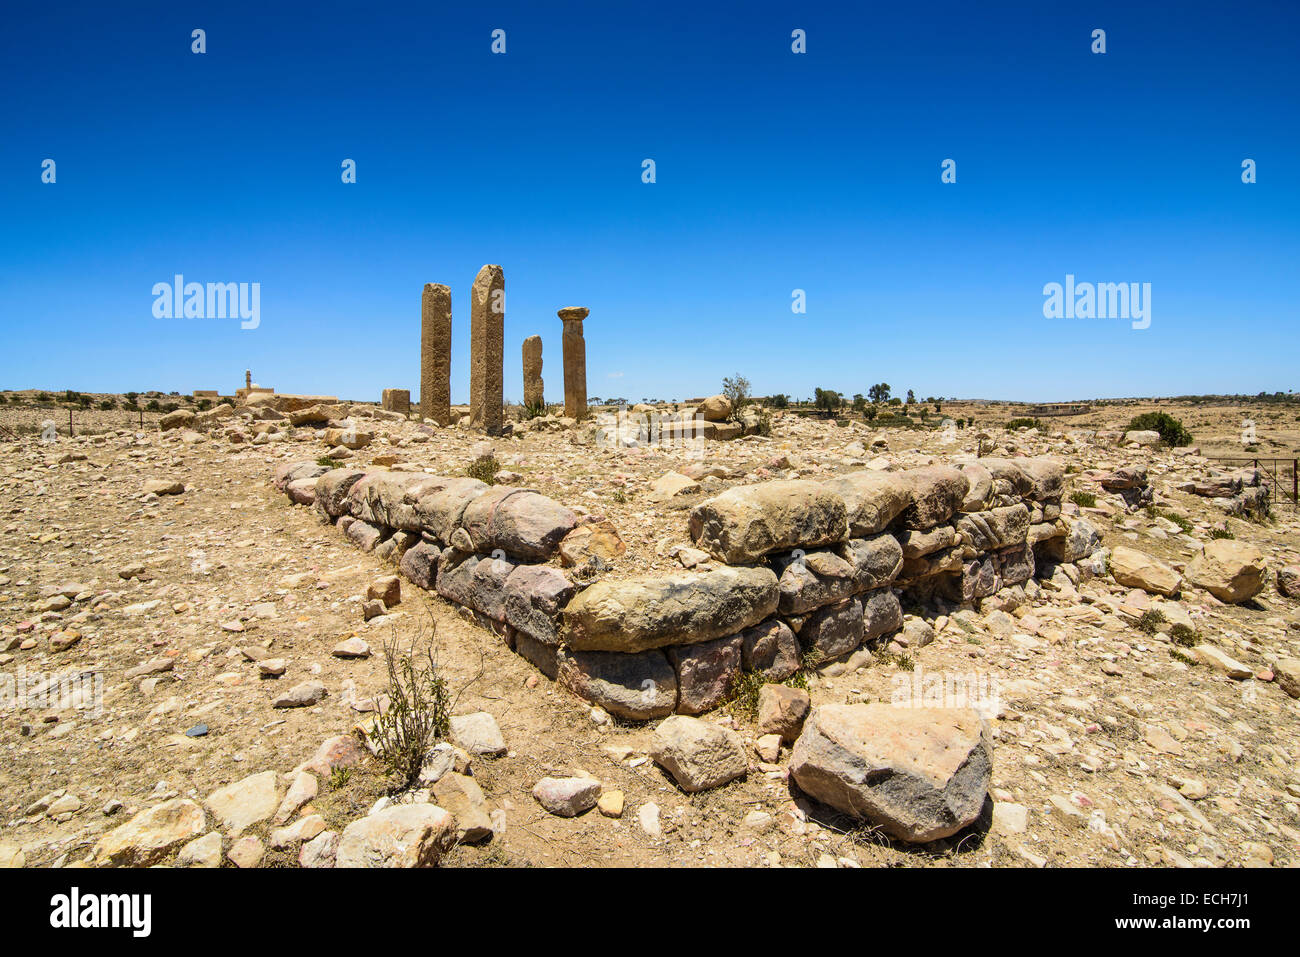 The columns of a ruined structure at the Pre-Aksumite settlement of Qohaito, Eritrea Stock Photo